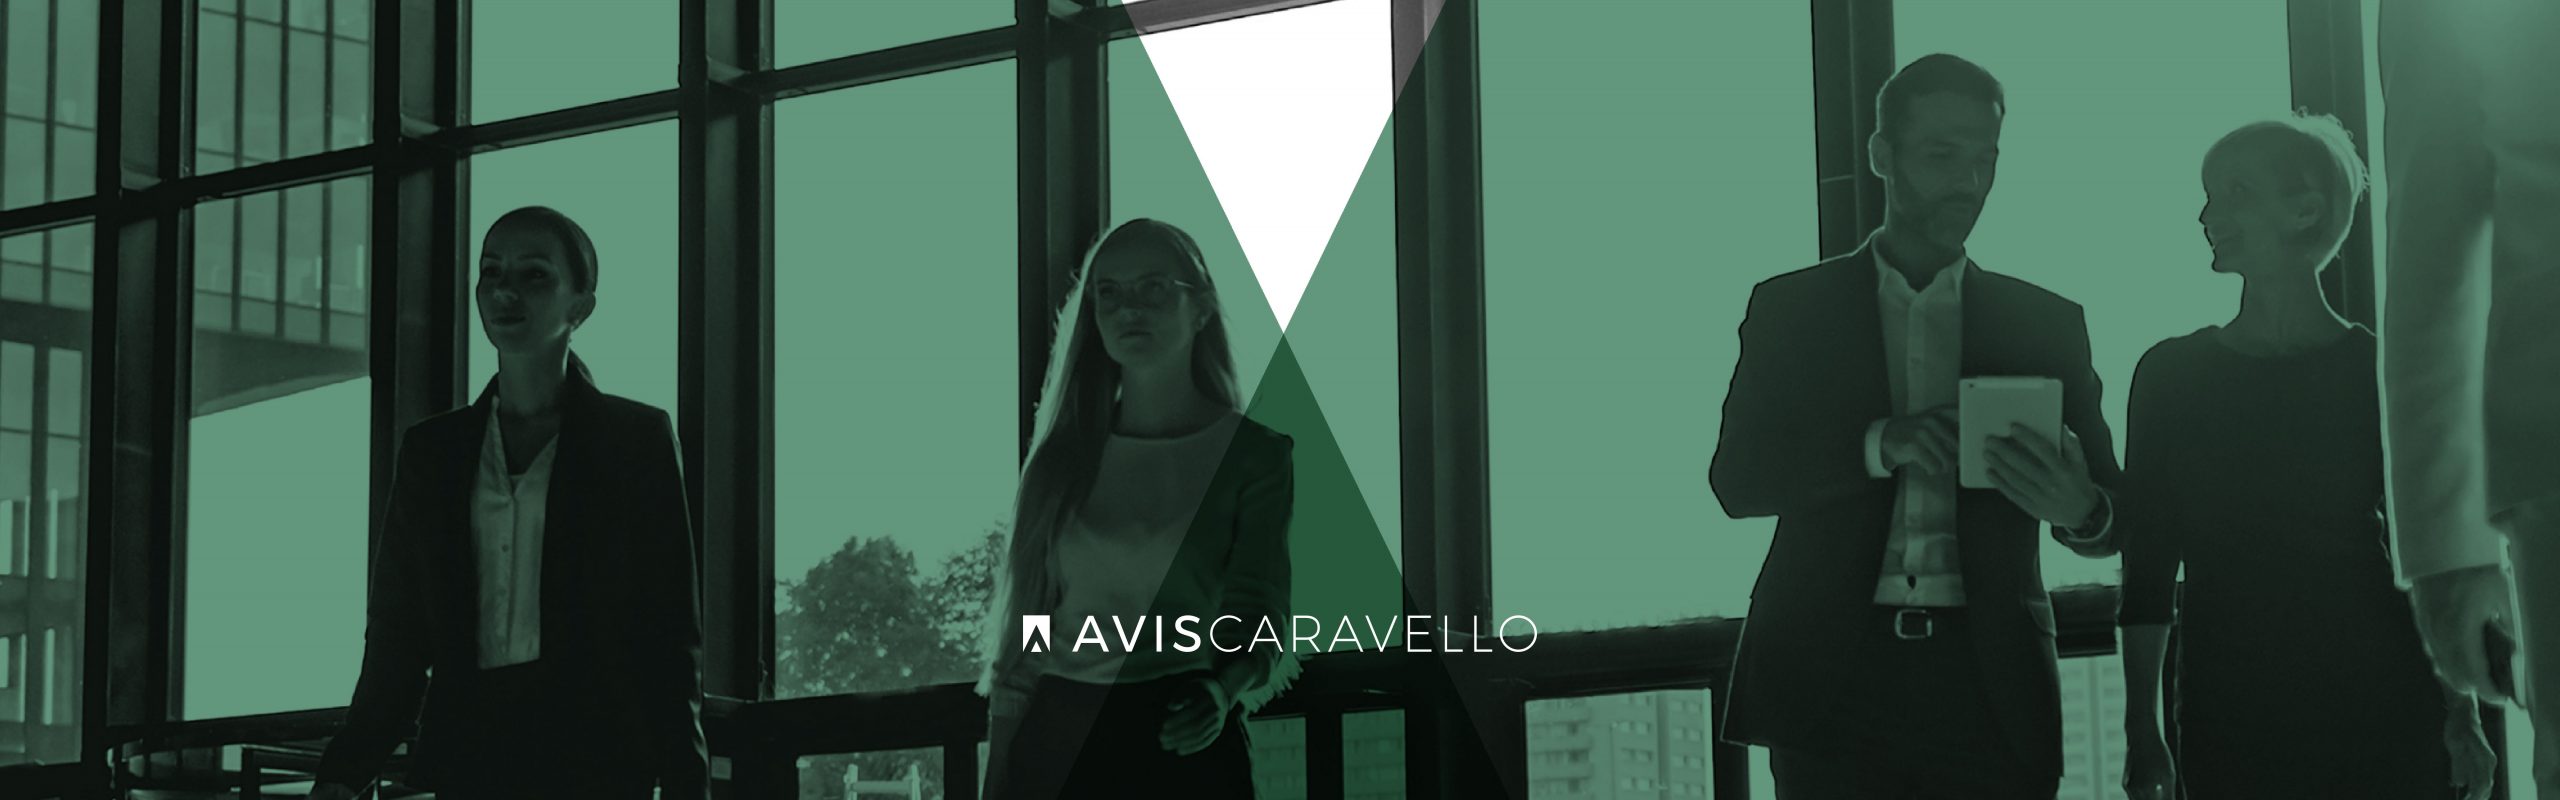 Four professionals walking through an office space with large windows in the background, displaying a muted color palette with a green overlay. Avis Caravello is among them.